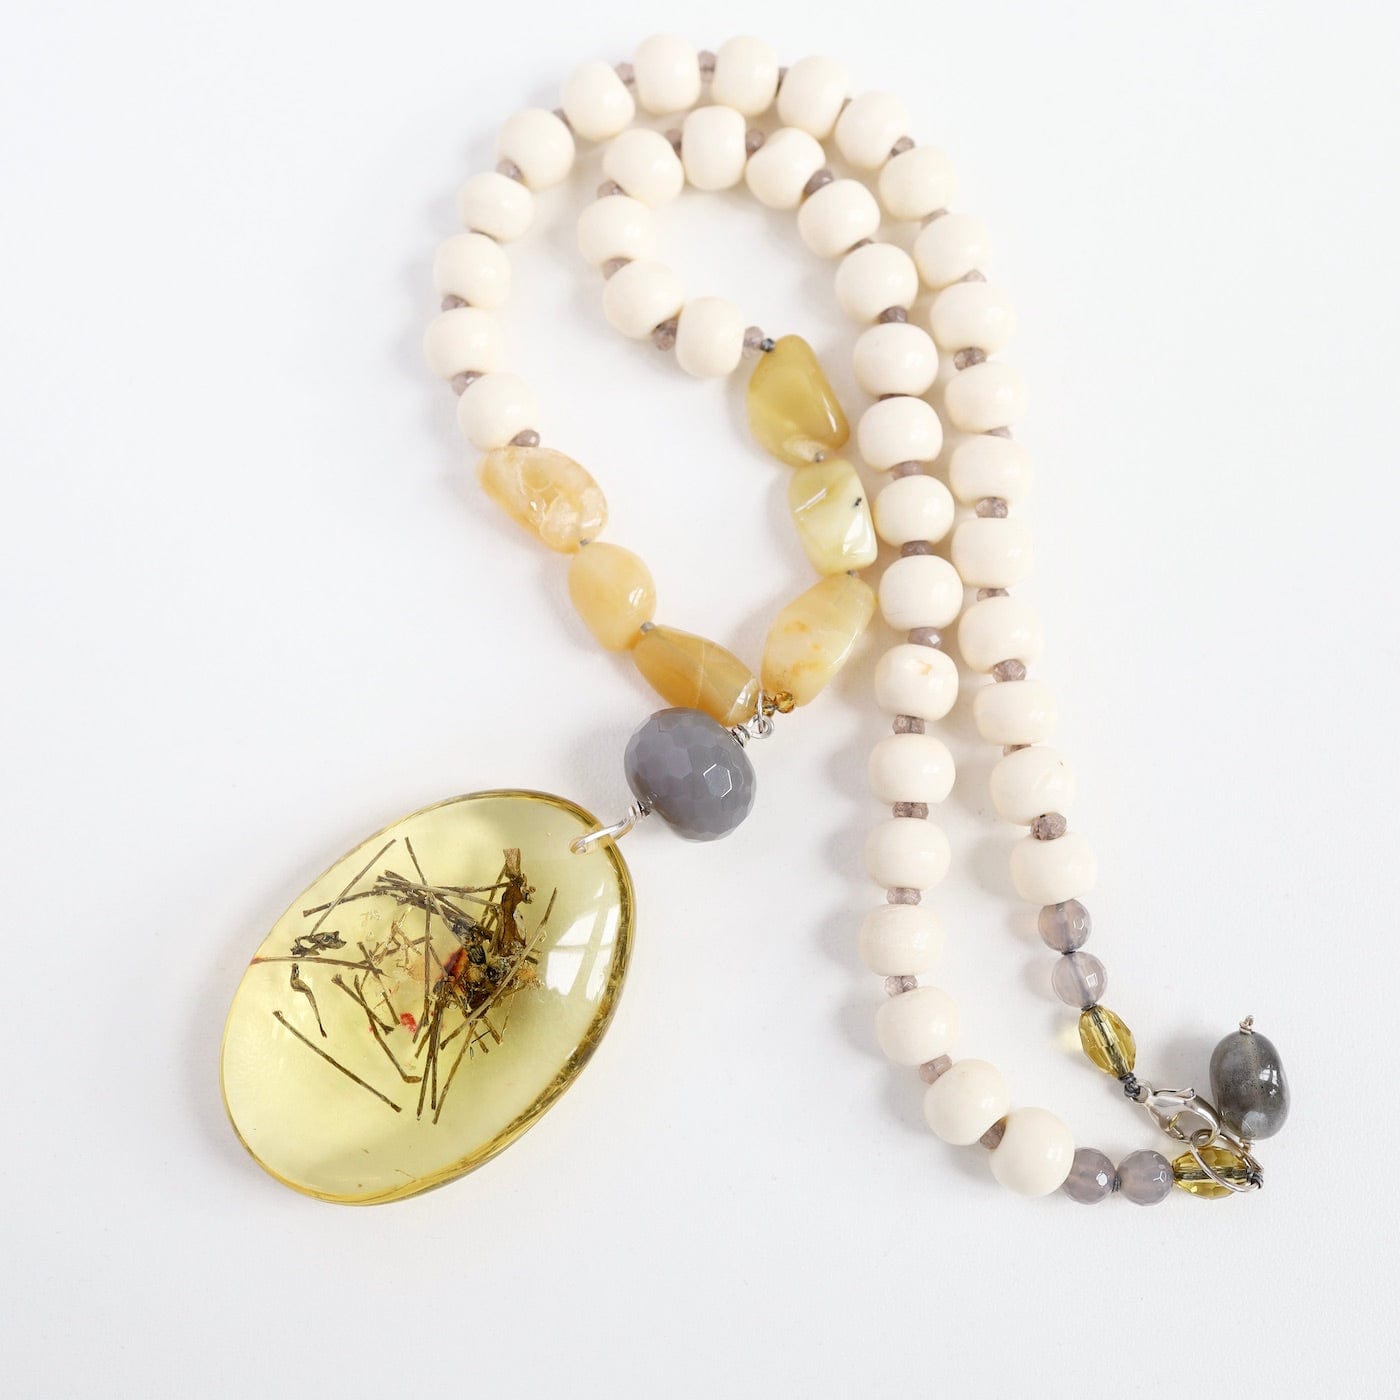 NKL Bone & Yellow Jade Necklace with Amber Pendant Necklace